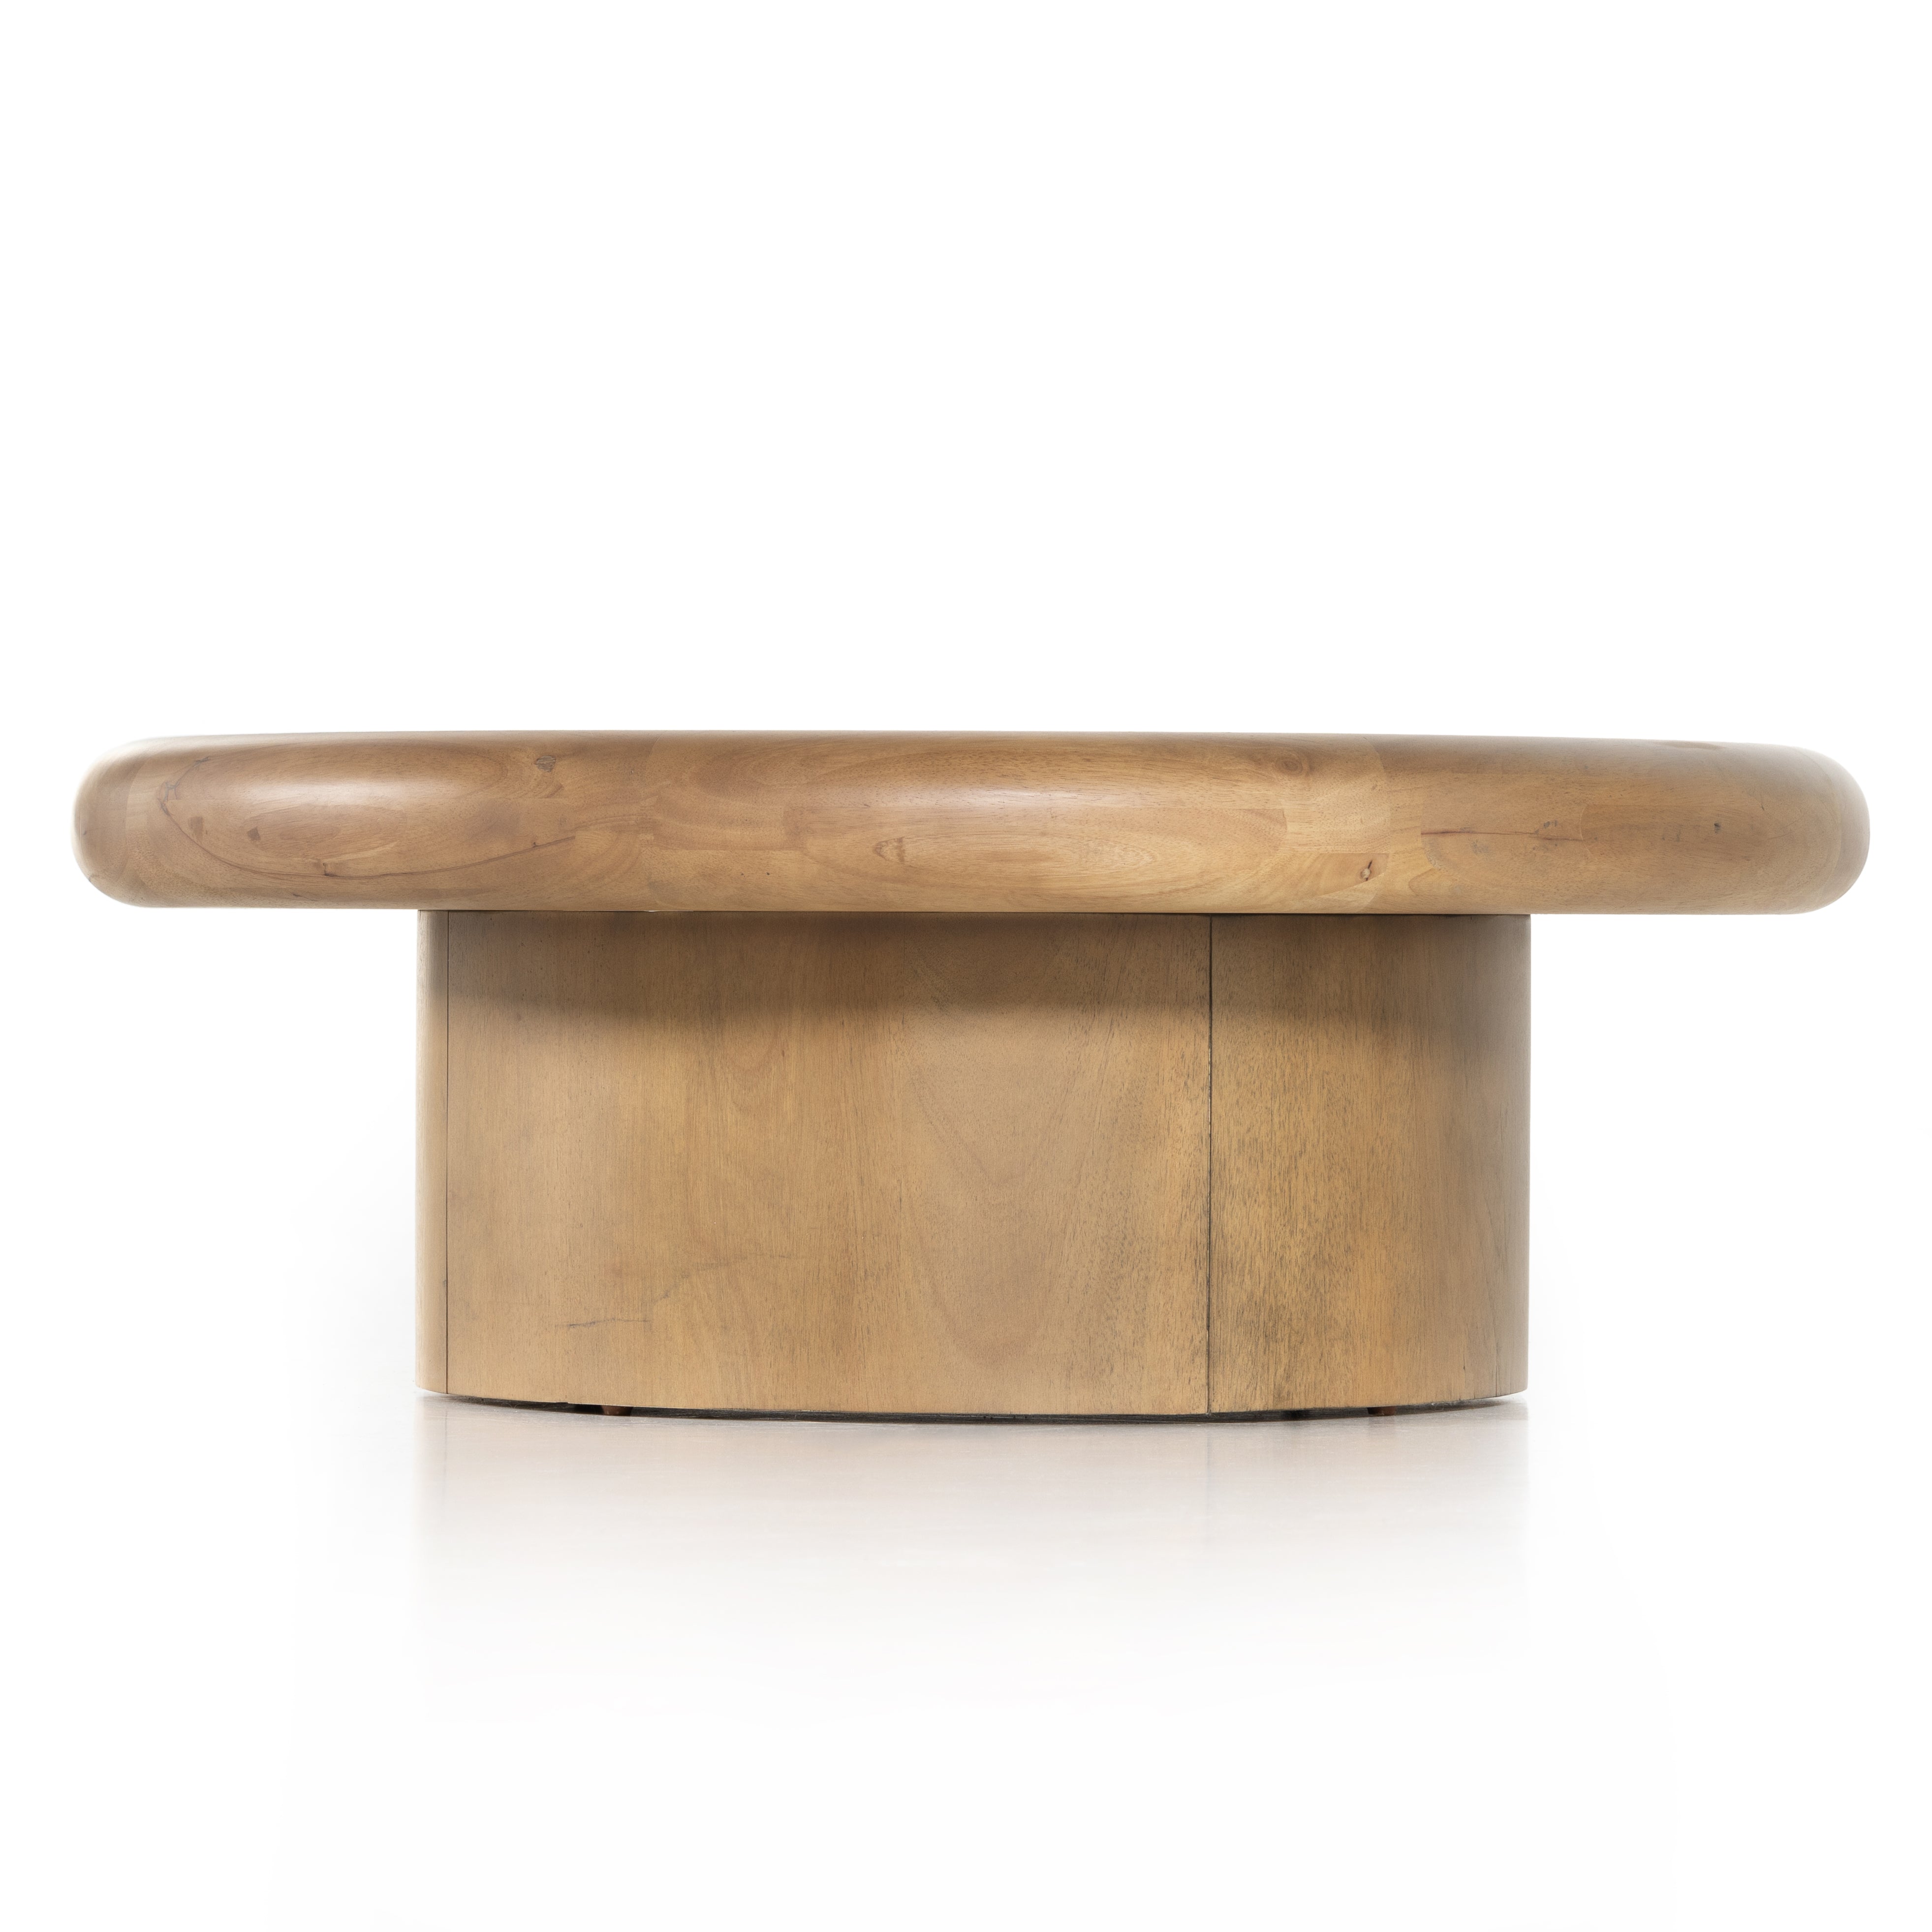 The Zach coffee table in burnished parawood features a pedestal-style base on a rounded tabletop with bullnose edging, for style and softness alike. Amethyst Home provides interior design, furniture, rugs, and design services in the Kansas City metro area.